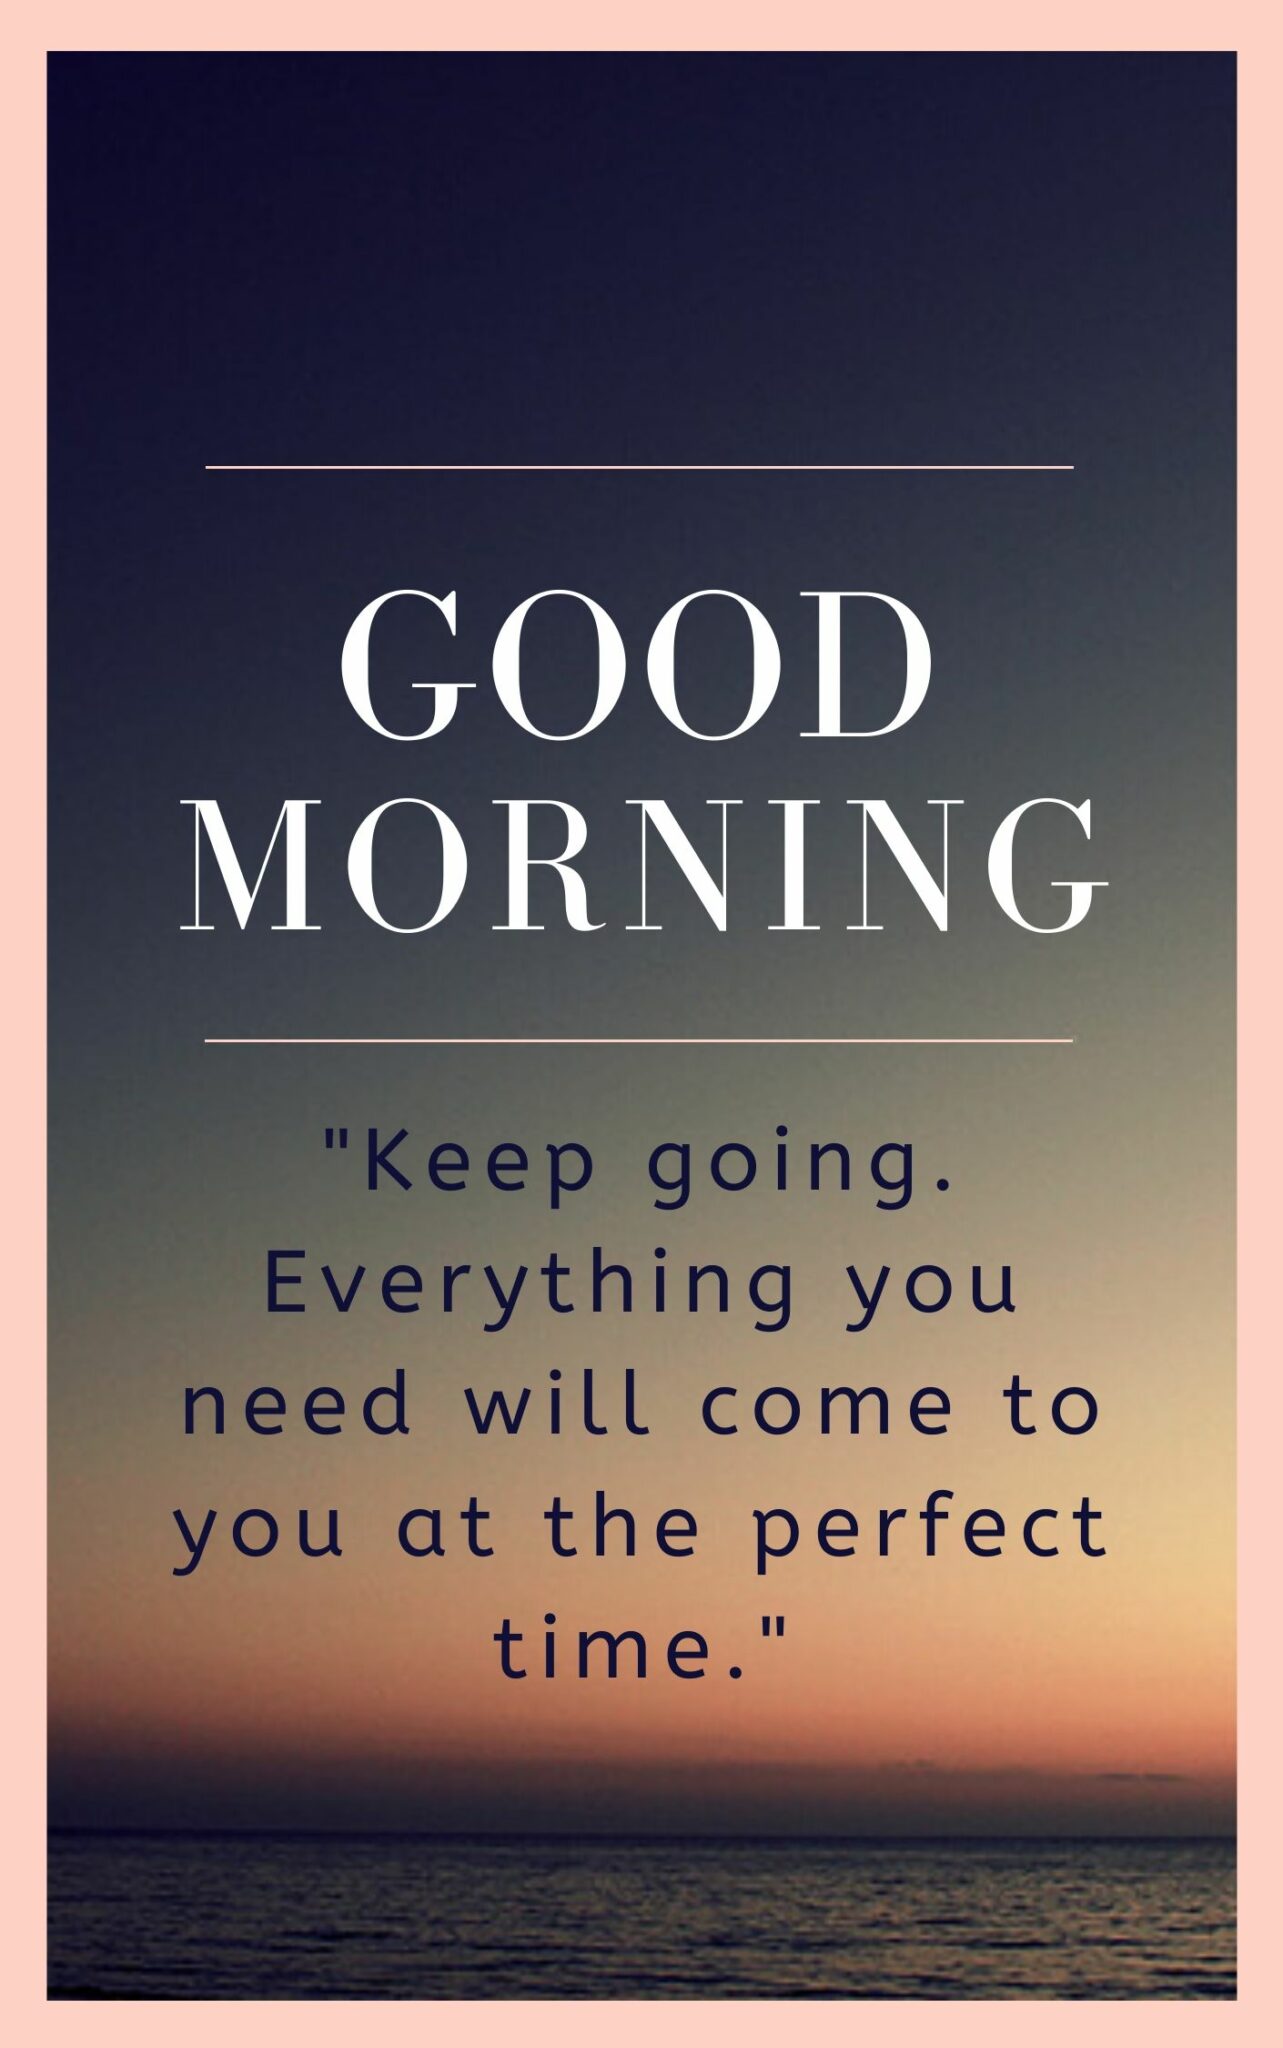 Keep going. Everything you need will come to you at the perfect time Good Morning Quote Image